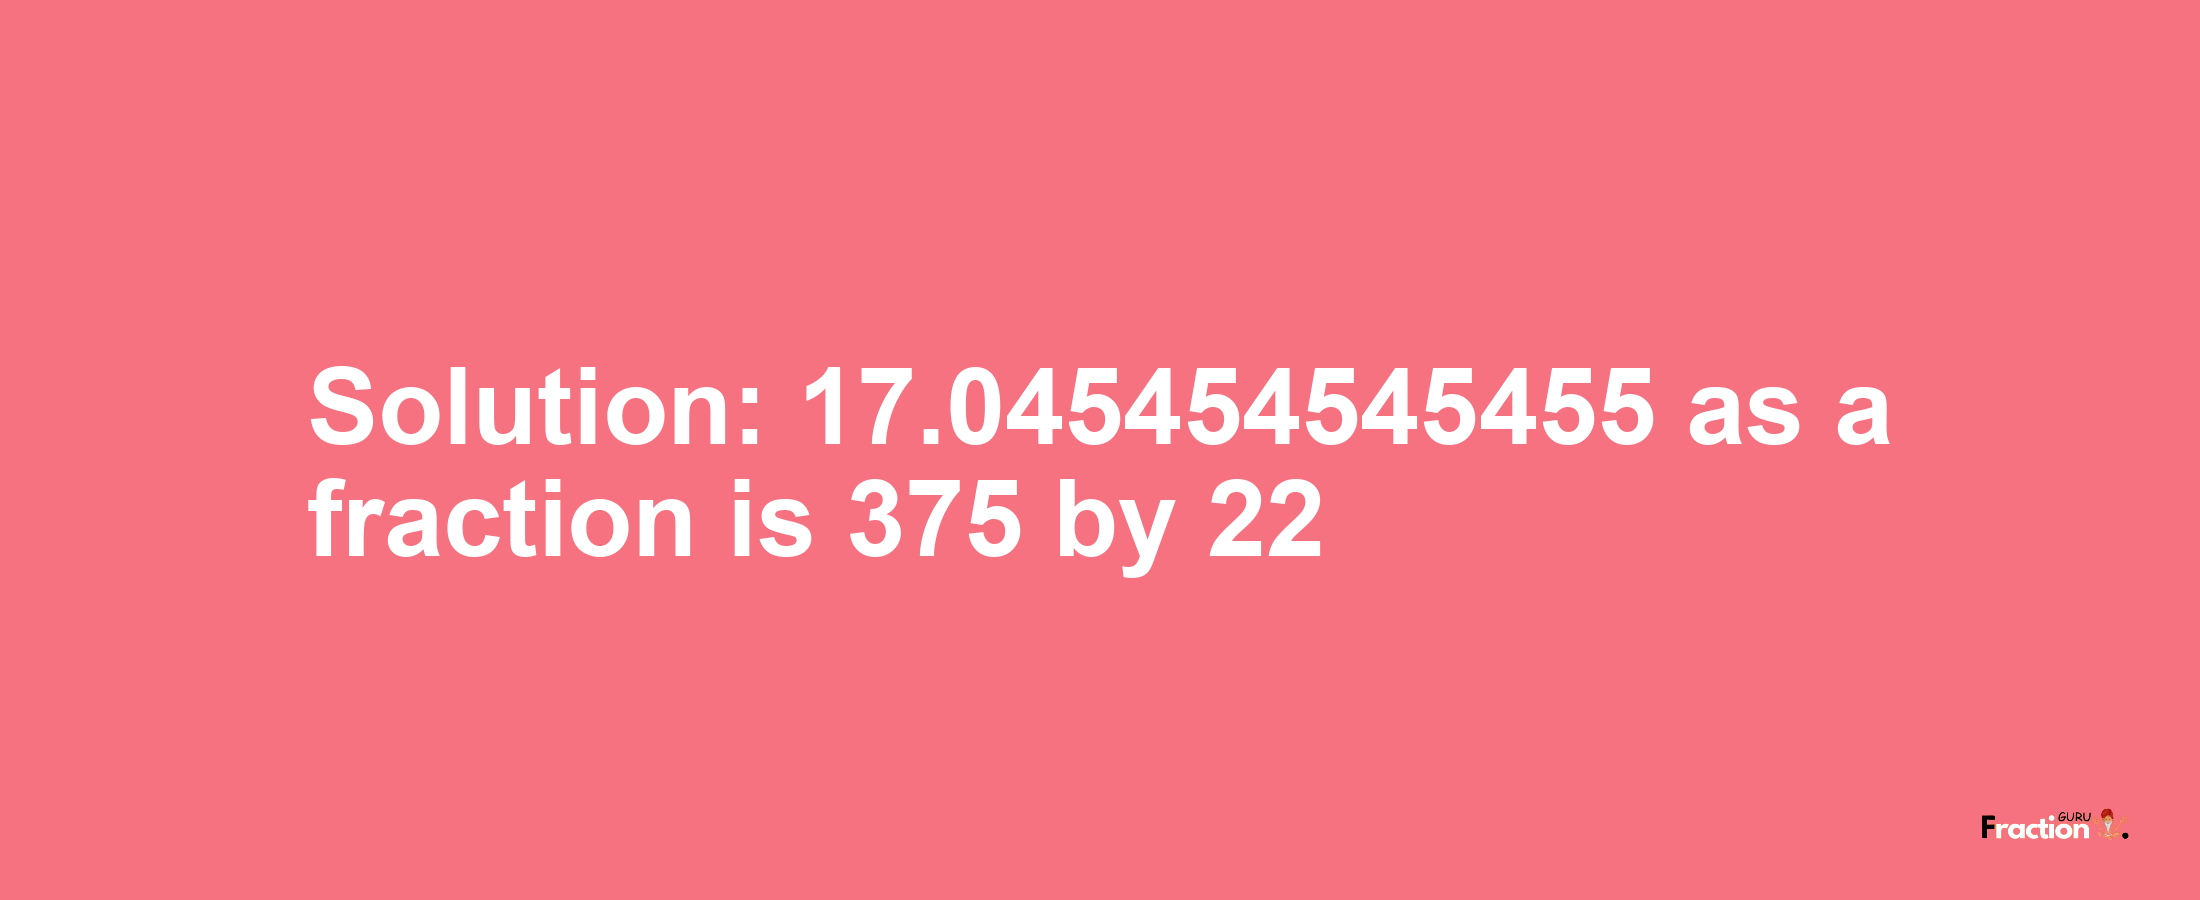 Solution:17.045454545455 as a fraction is 375/22